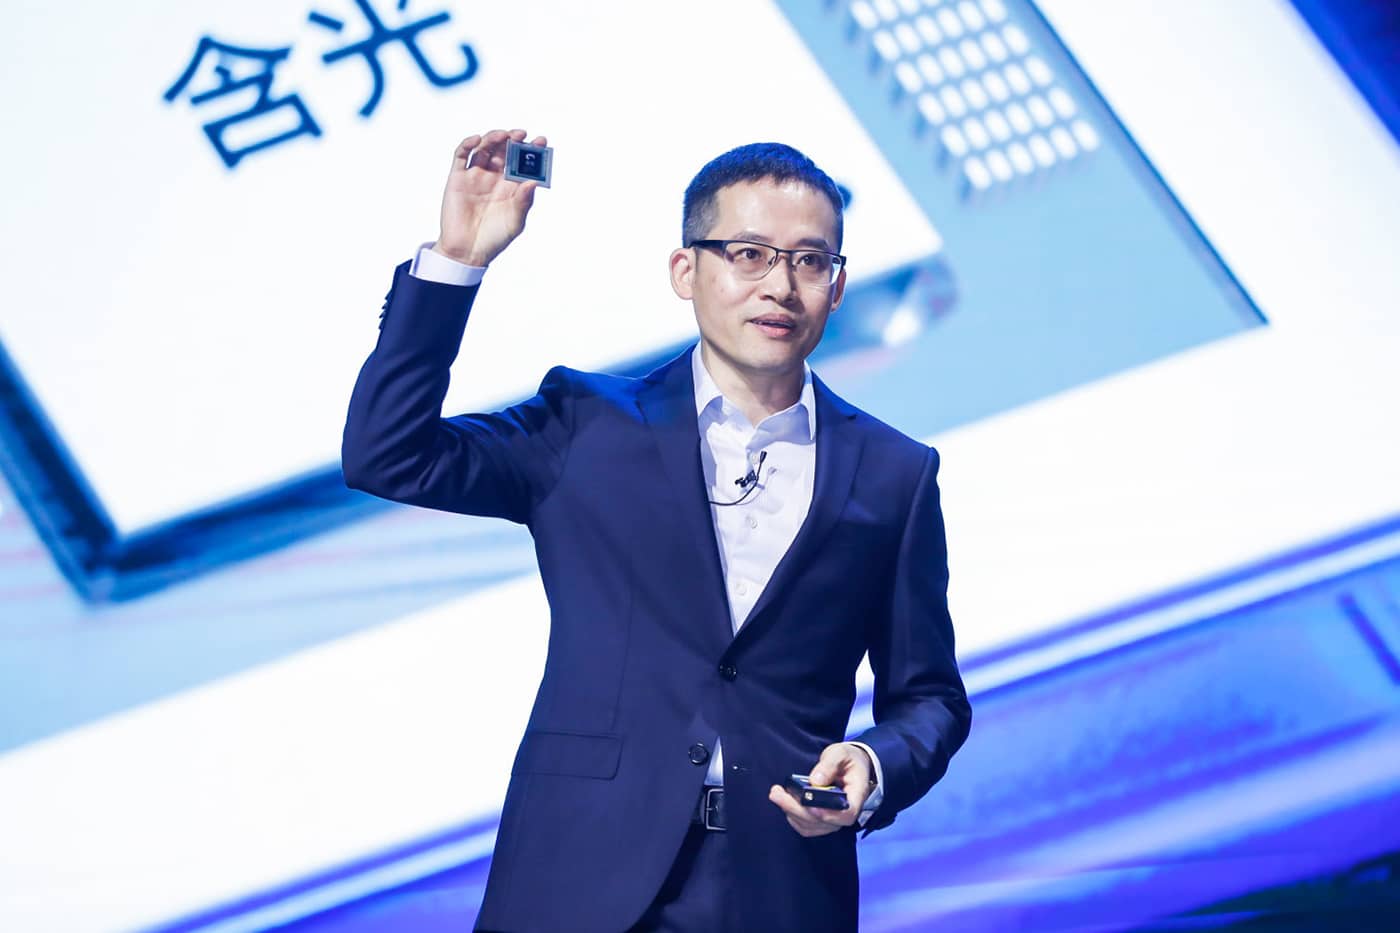 Jeff Zhang, Alibaba Group CTO shows the company's first AI inference chip called Hanguang 800.